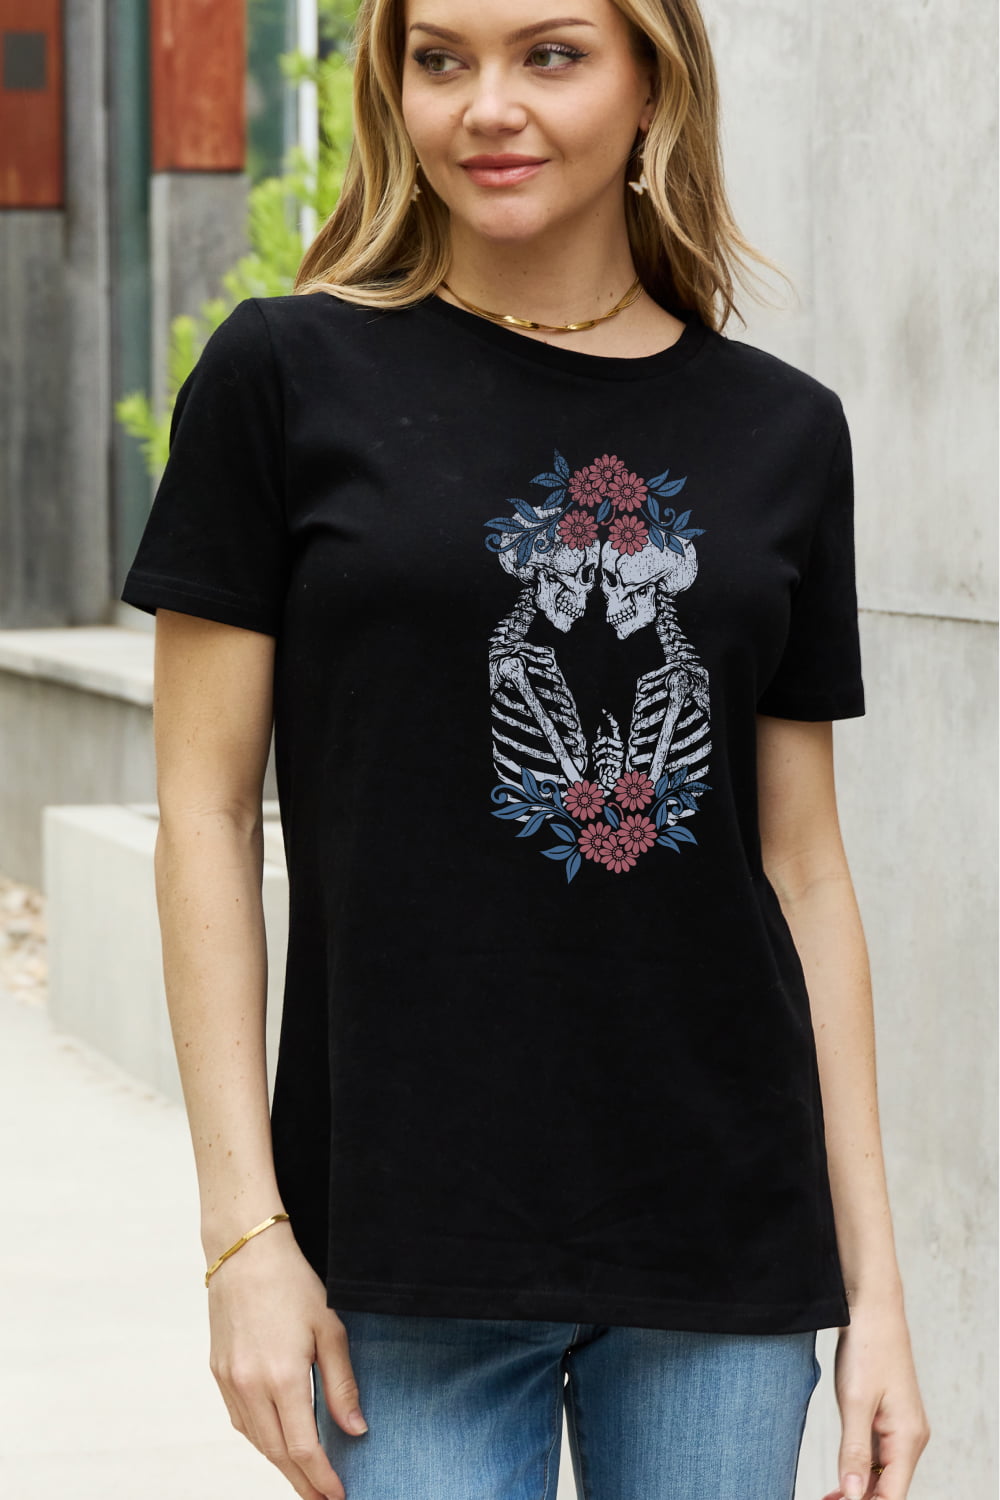 Lovers Skeletons with Flower Crowns Graphic Cotton Tee